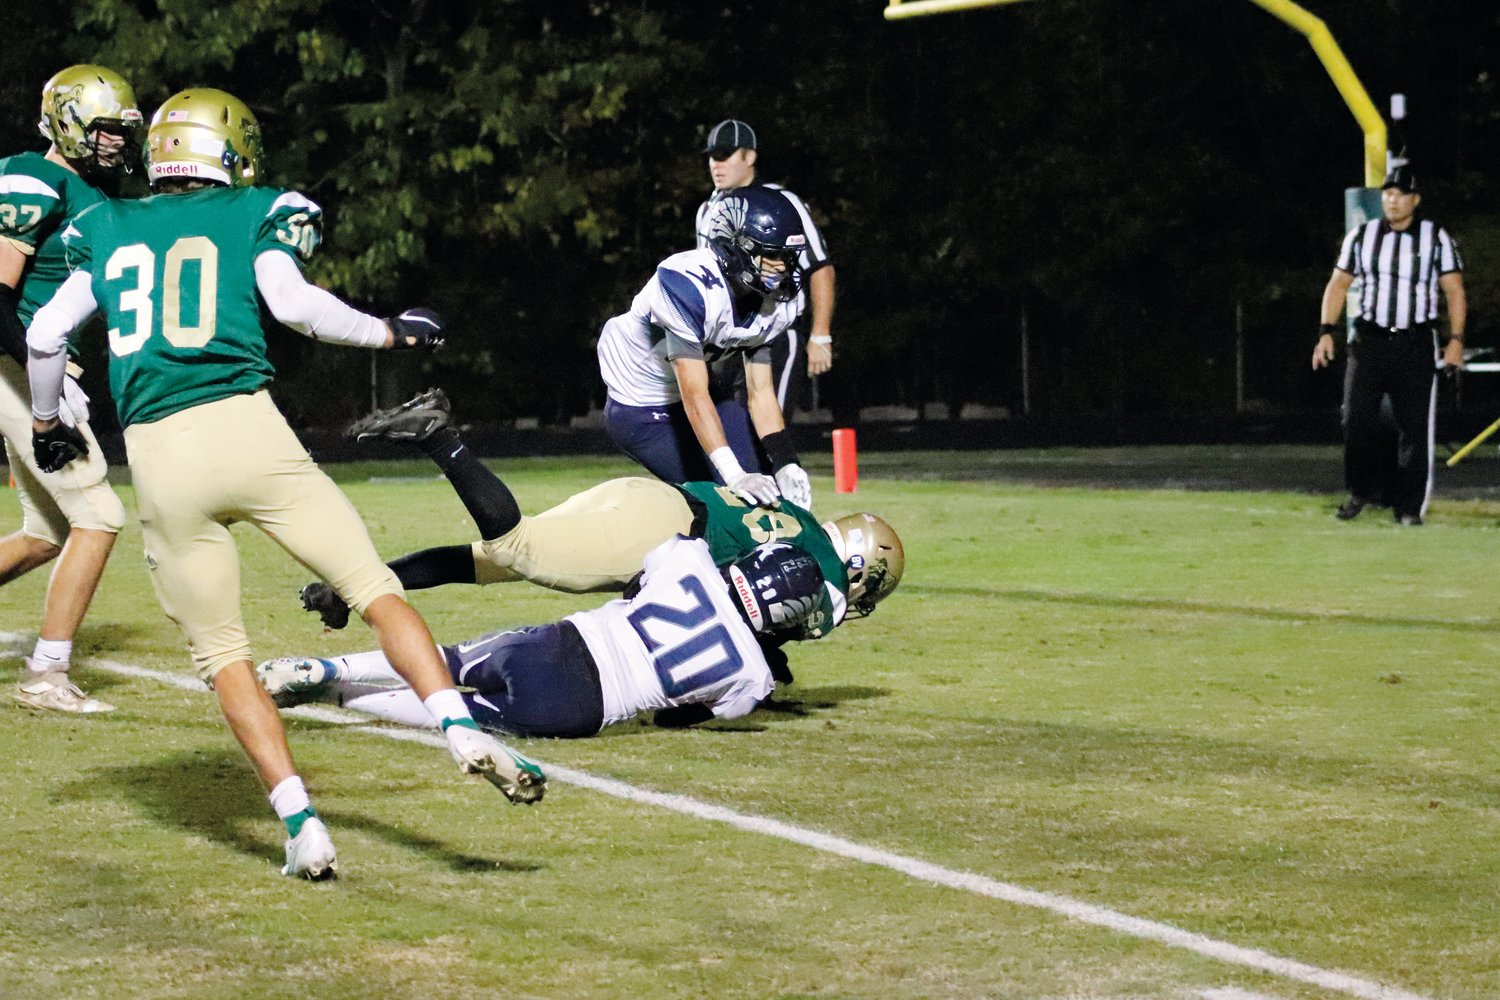 Northwood senior running back Dashaun Vines-McSwain (in green) is tackled into the end zone in the first quarter of the Chargers' 21-6 loss to Western Alamance last Friday. Vines-McSwain's 4-yard rush TD was the only score of the game for Northwood.